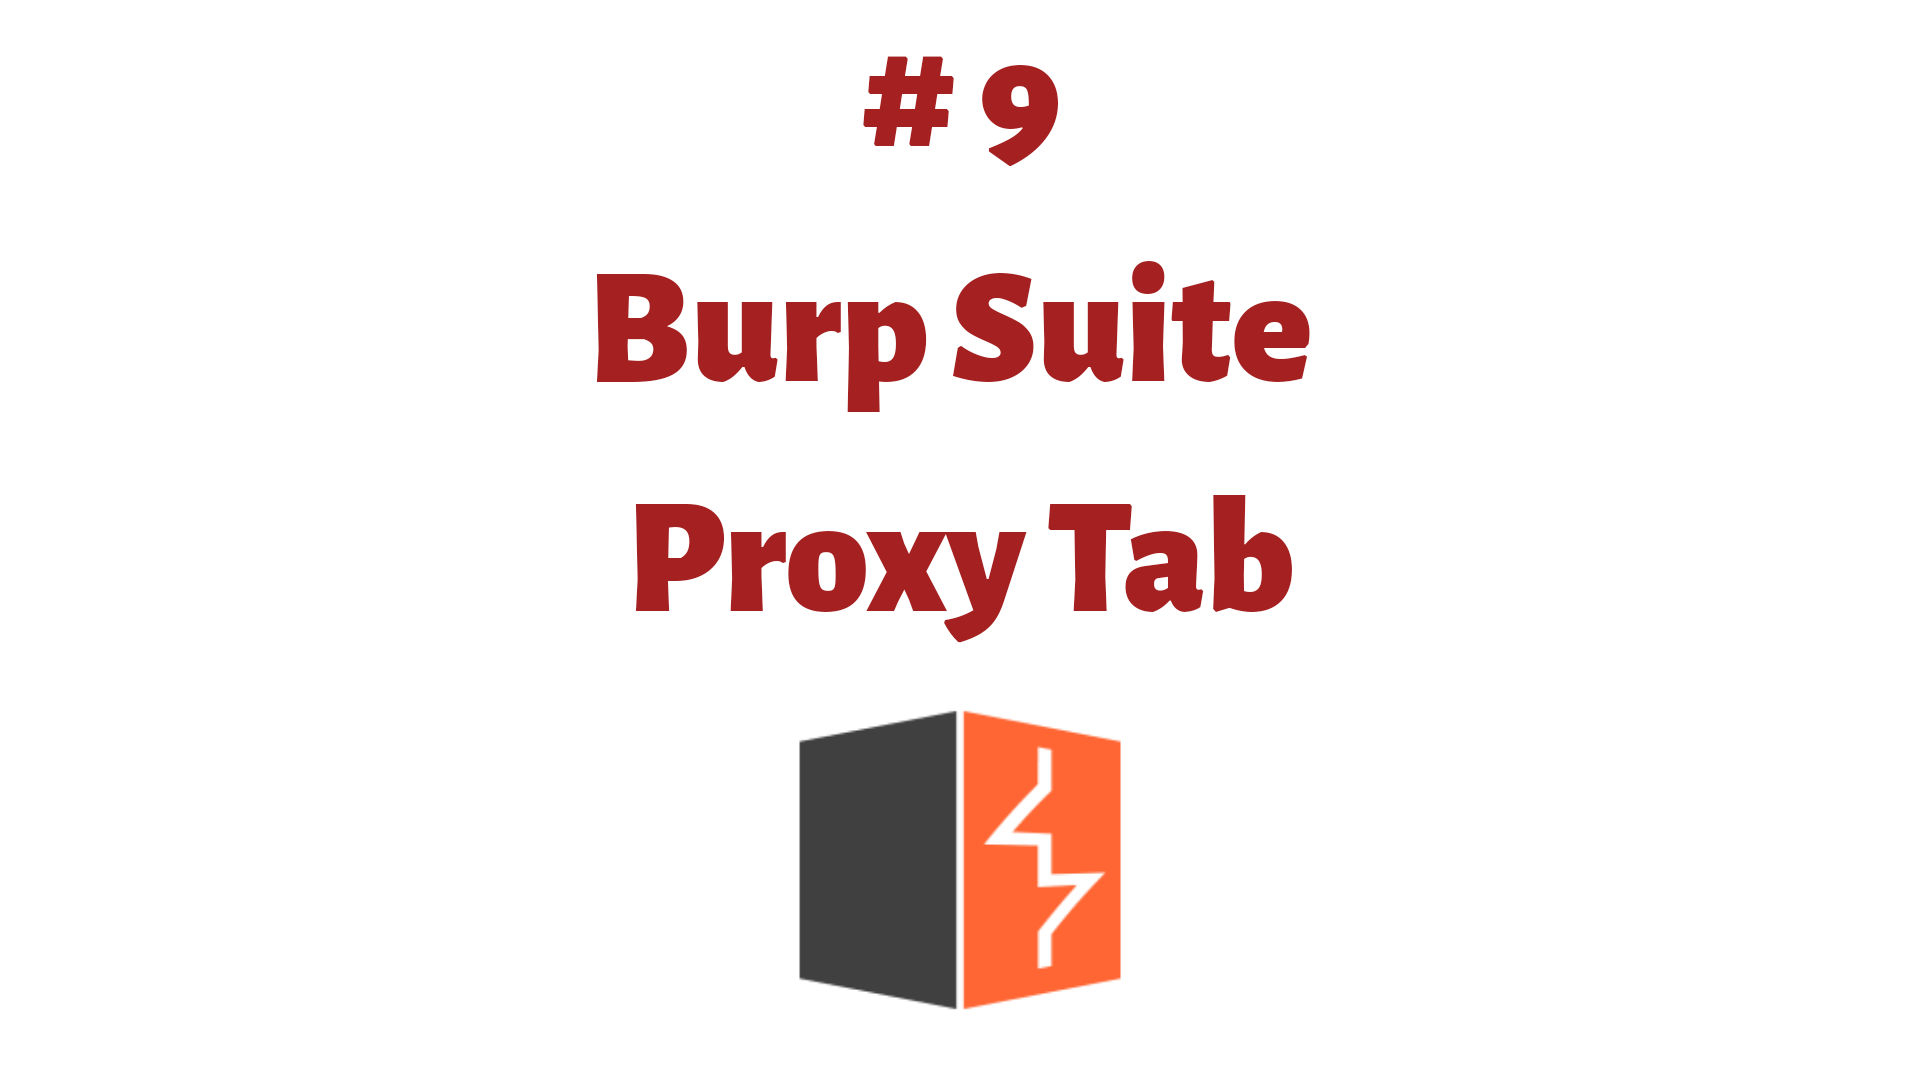 You are currently viewing Proxy Tab – Guide for Burp Suite
<span class="bsf-rt-reading-time"><span class="bsf-rt-display-label" prefix=""></span> <span class="bsf-rt-display-time" reading_time="4"></span> <span class="bsf-rt-display-postfix" postfix="min read"></span></span><!-- .bsf-rt-reading-time -->